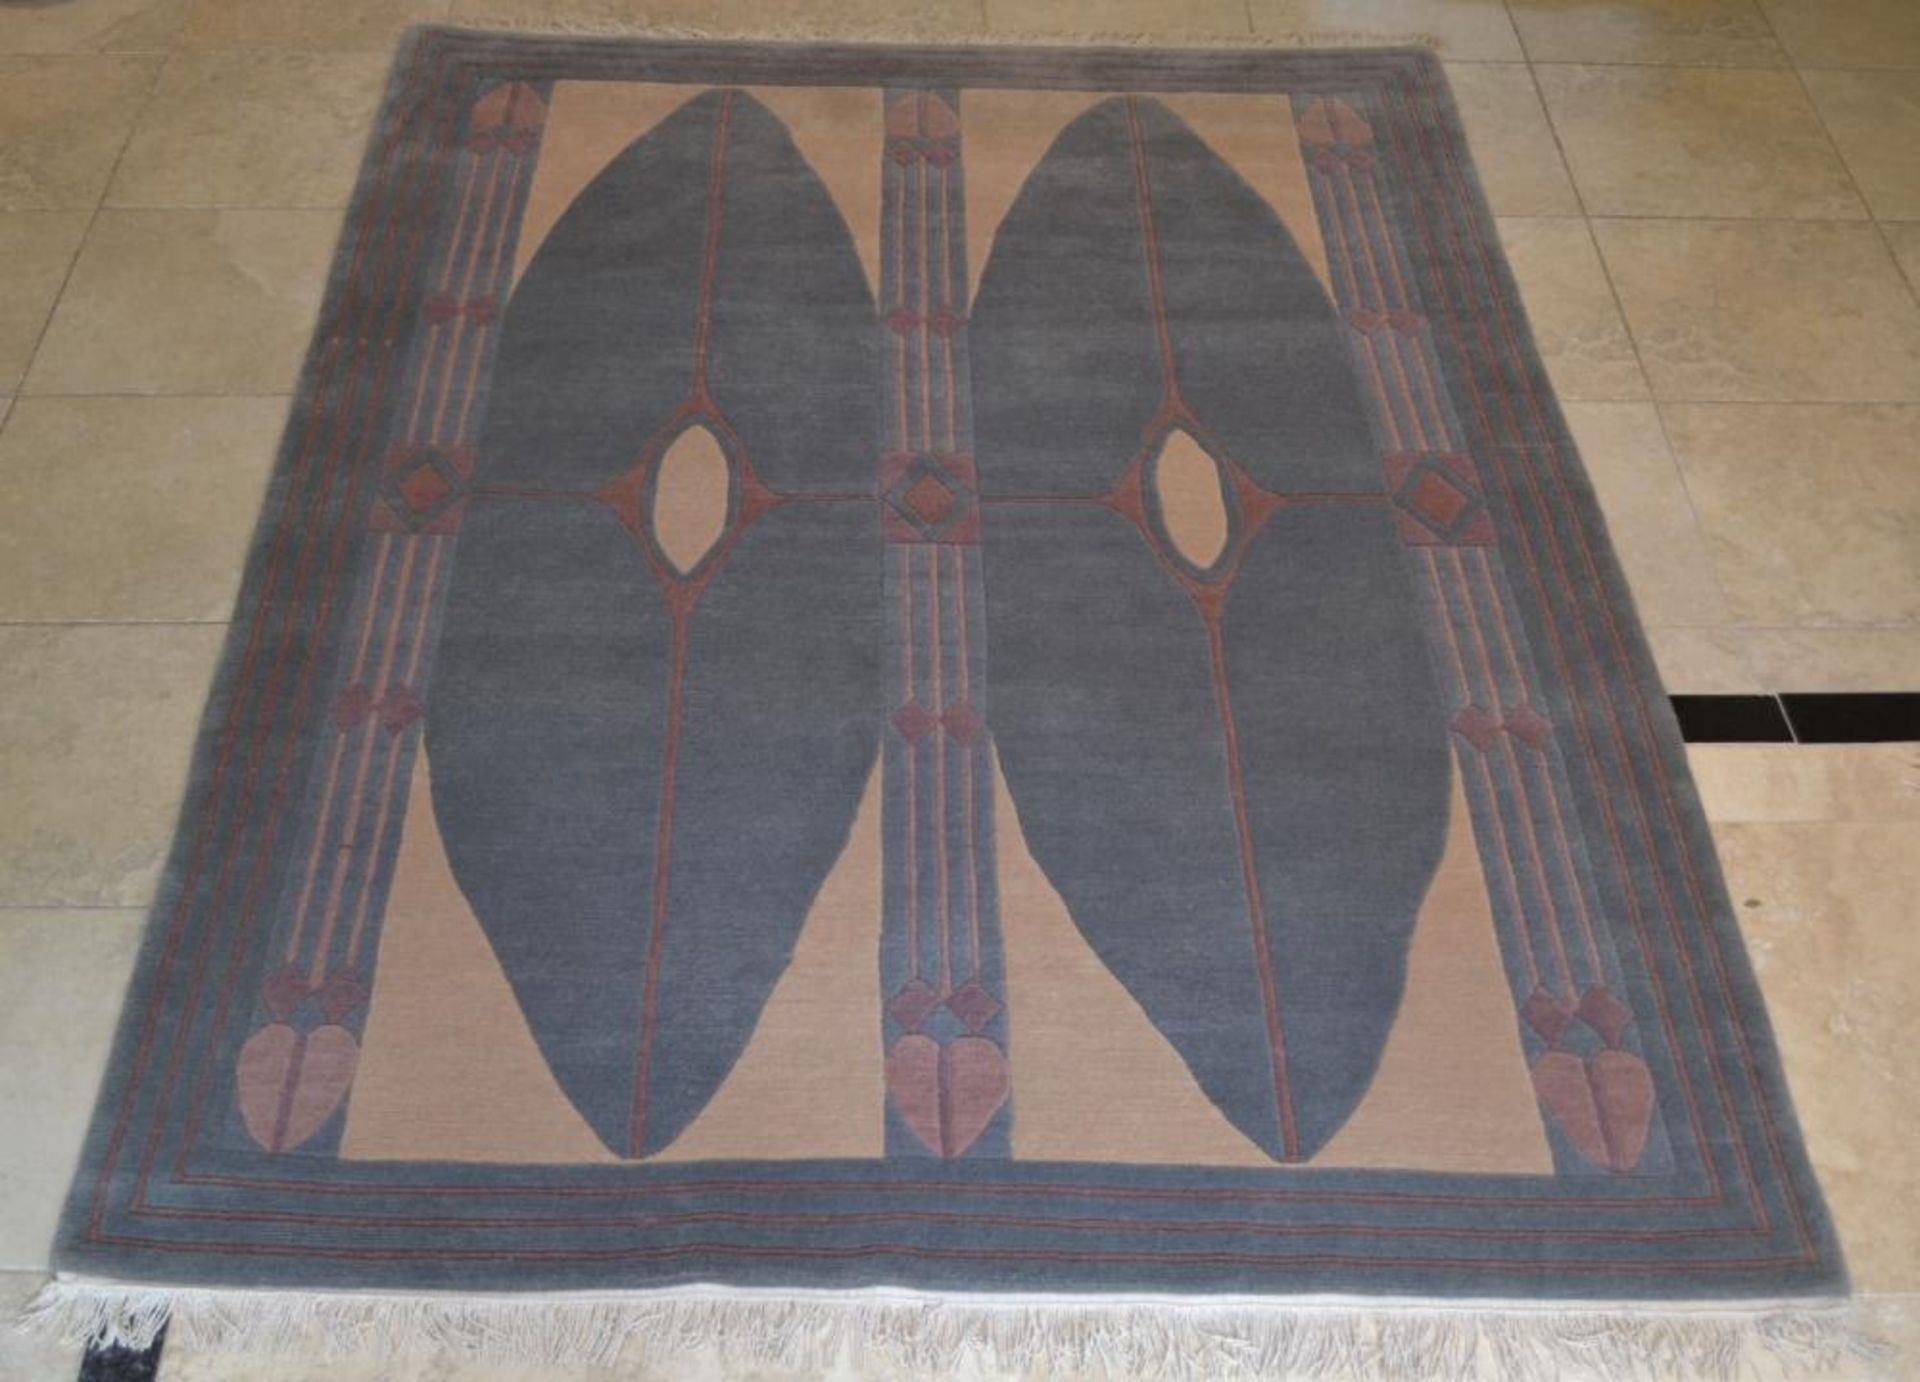 1 x Hand Knotted Mackintosh Design Nepalese Carpet - 100% Wool - Dimensions: 174x247cm - Unused - NO - Image 3 of 12